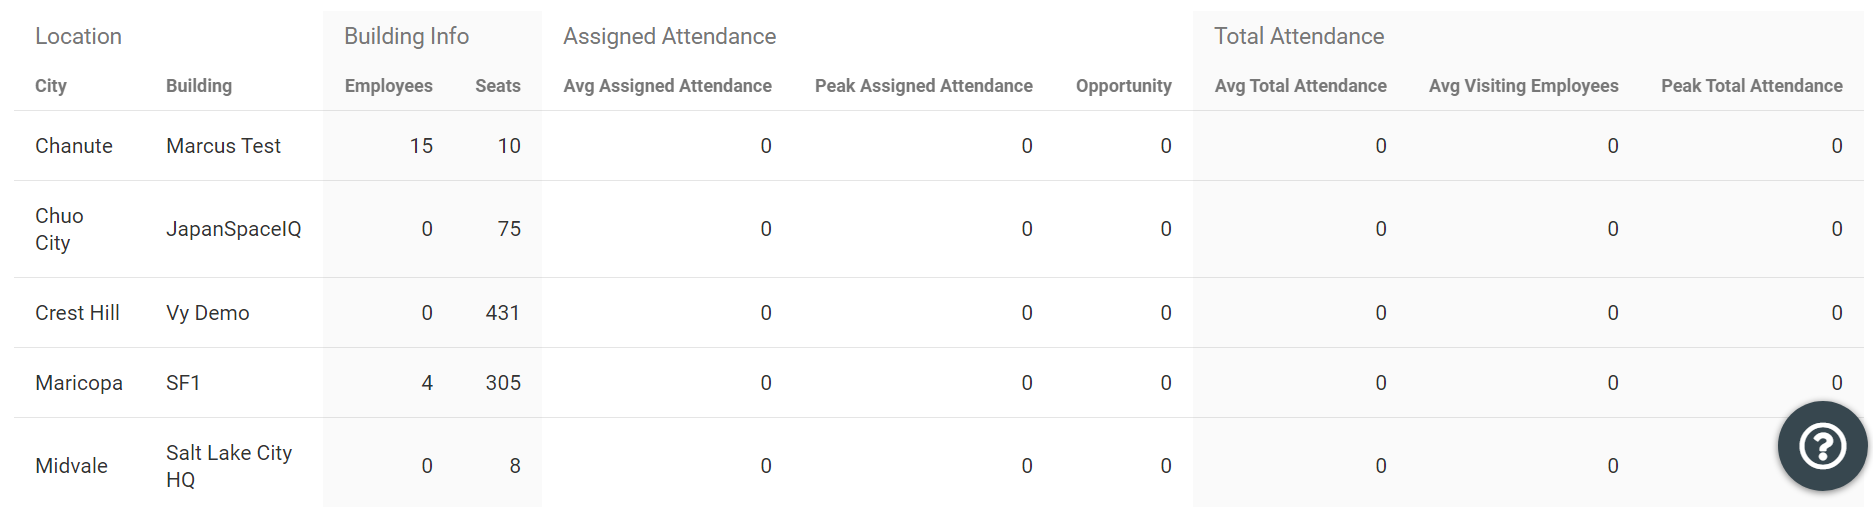 attendance_per_buidliing2.png